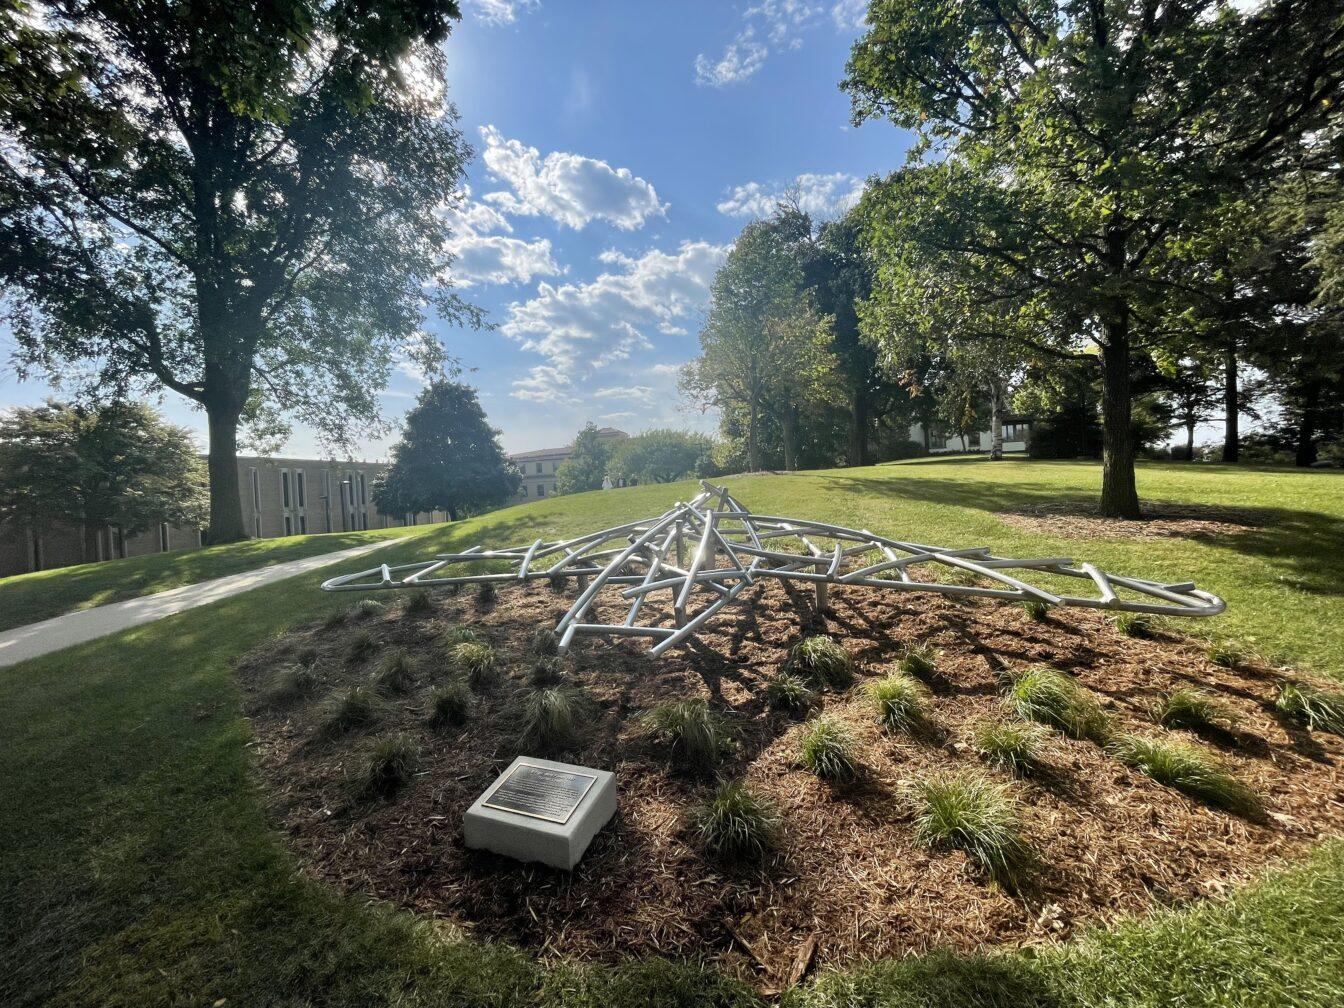 Ho-Chunk sculpture installed on campus 30 years after its creation